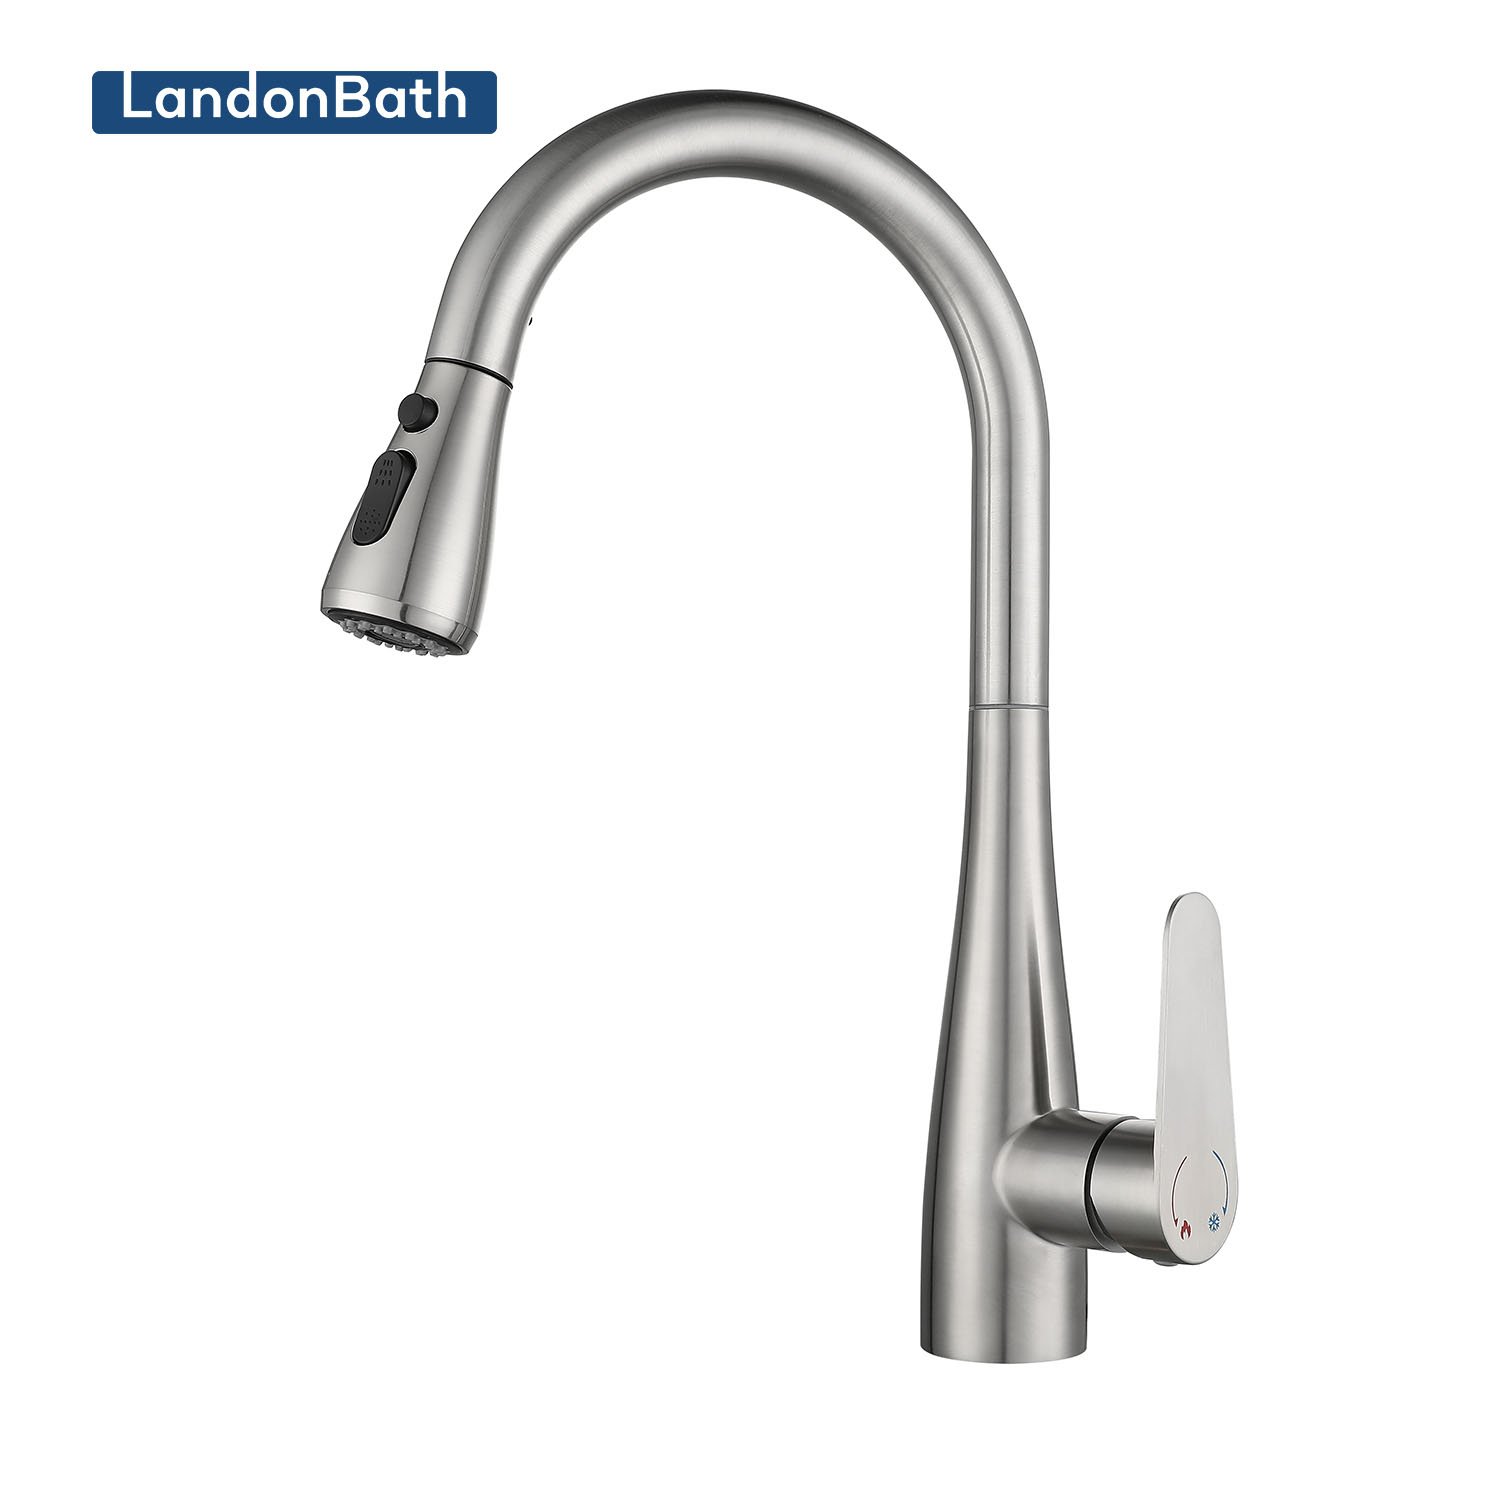 China Factory OEM Wholesale Faucet Tap Luxury Single Handle Pull Out Kitchen Sink Mixer Faucet